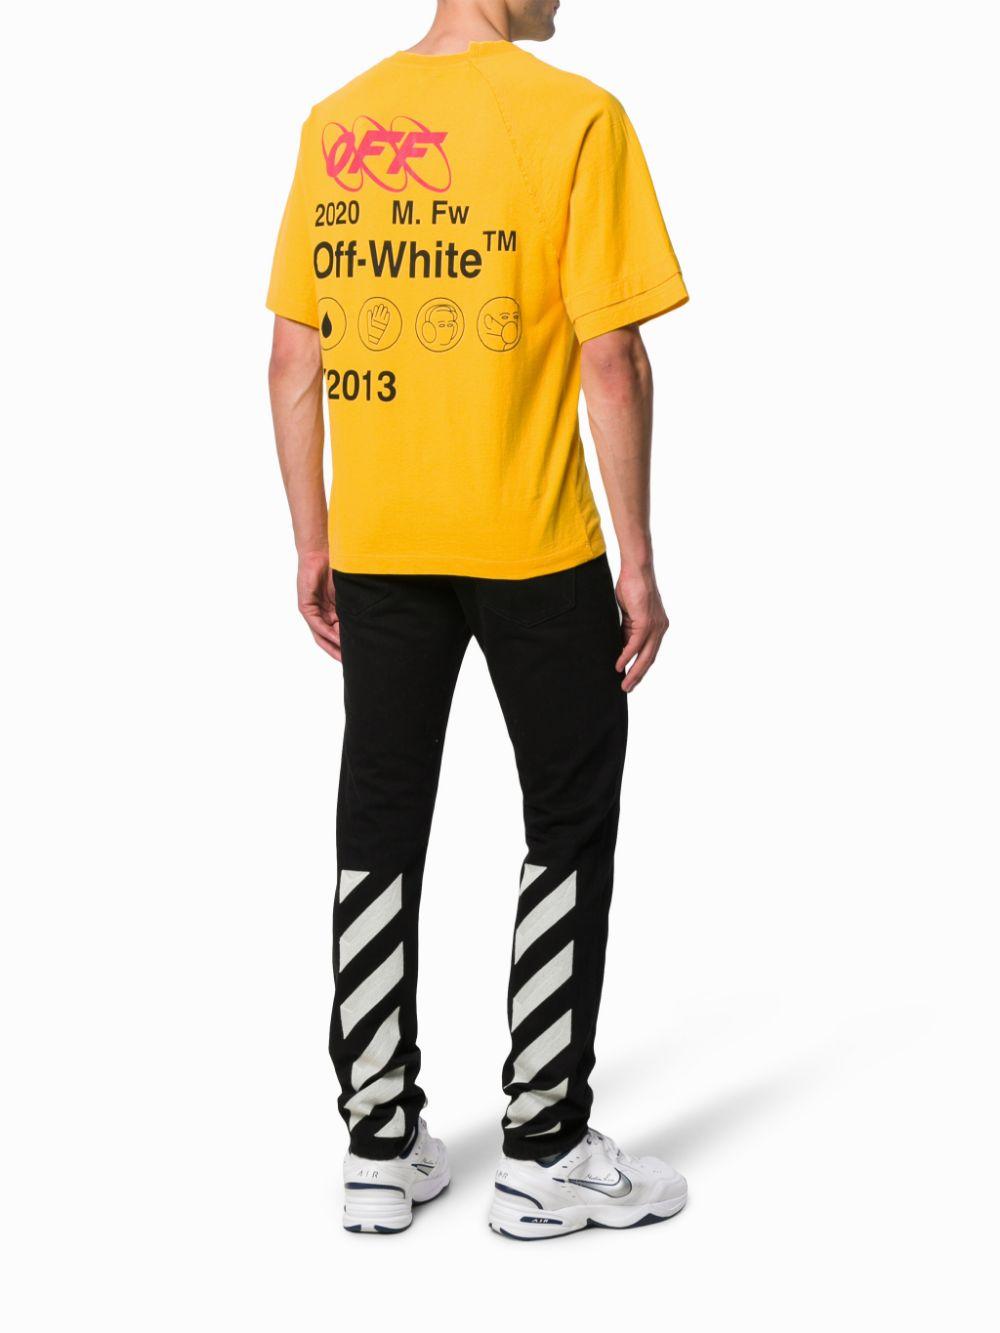 Off-White c/o Virgil Abloh Industrial Y013 Reconstructed Tee in Yellow for  Men | Lyst